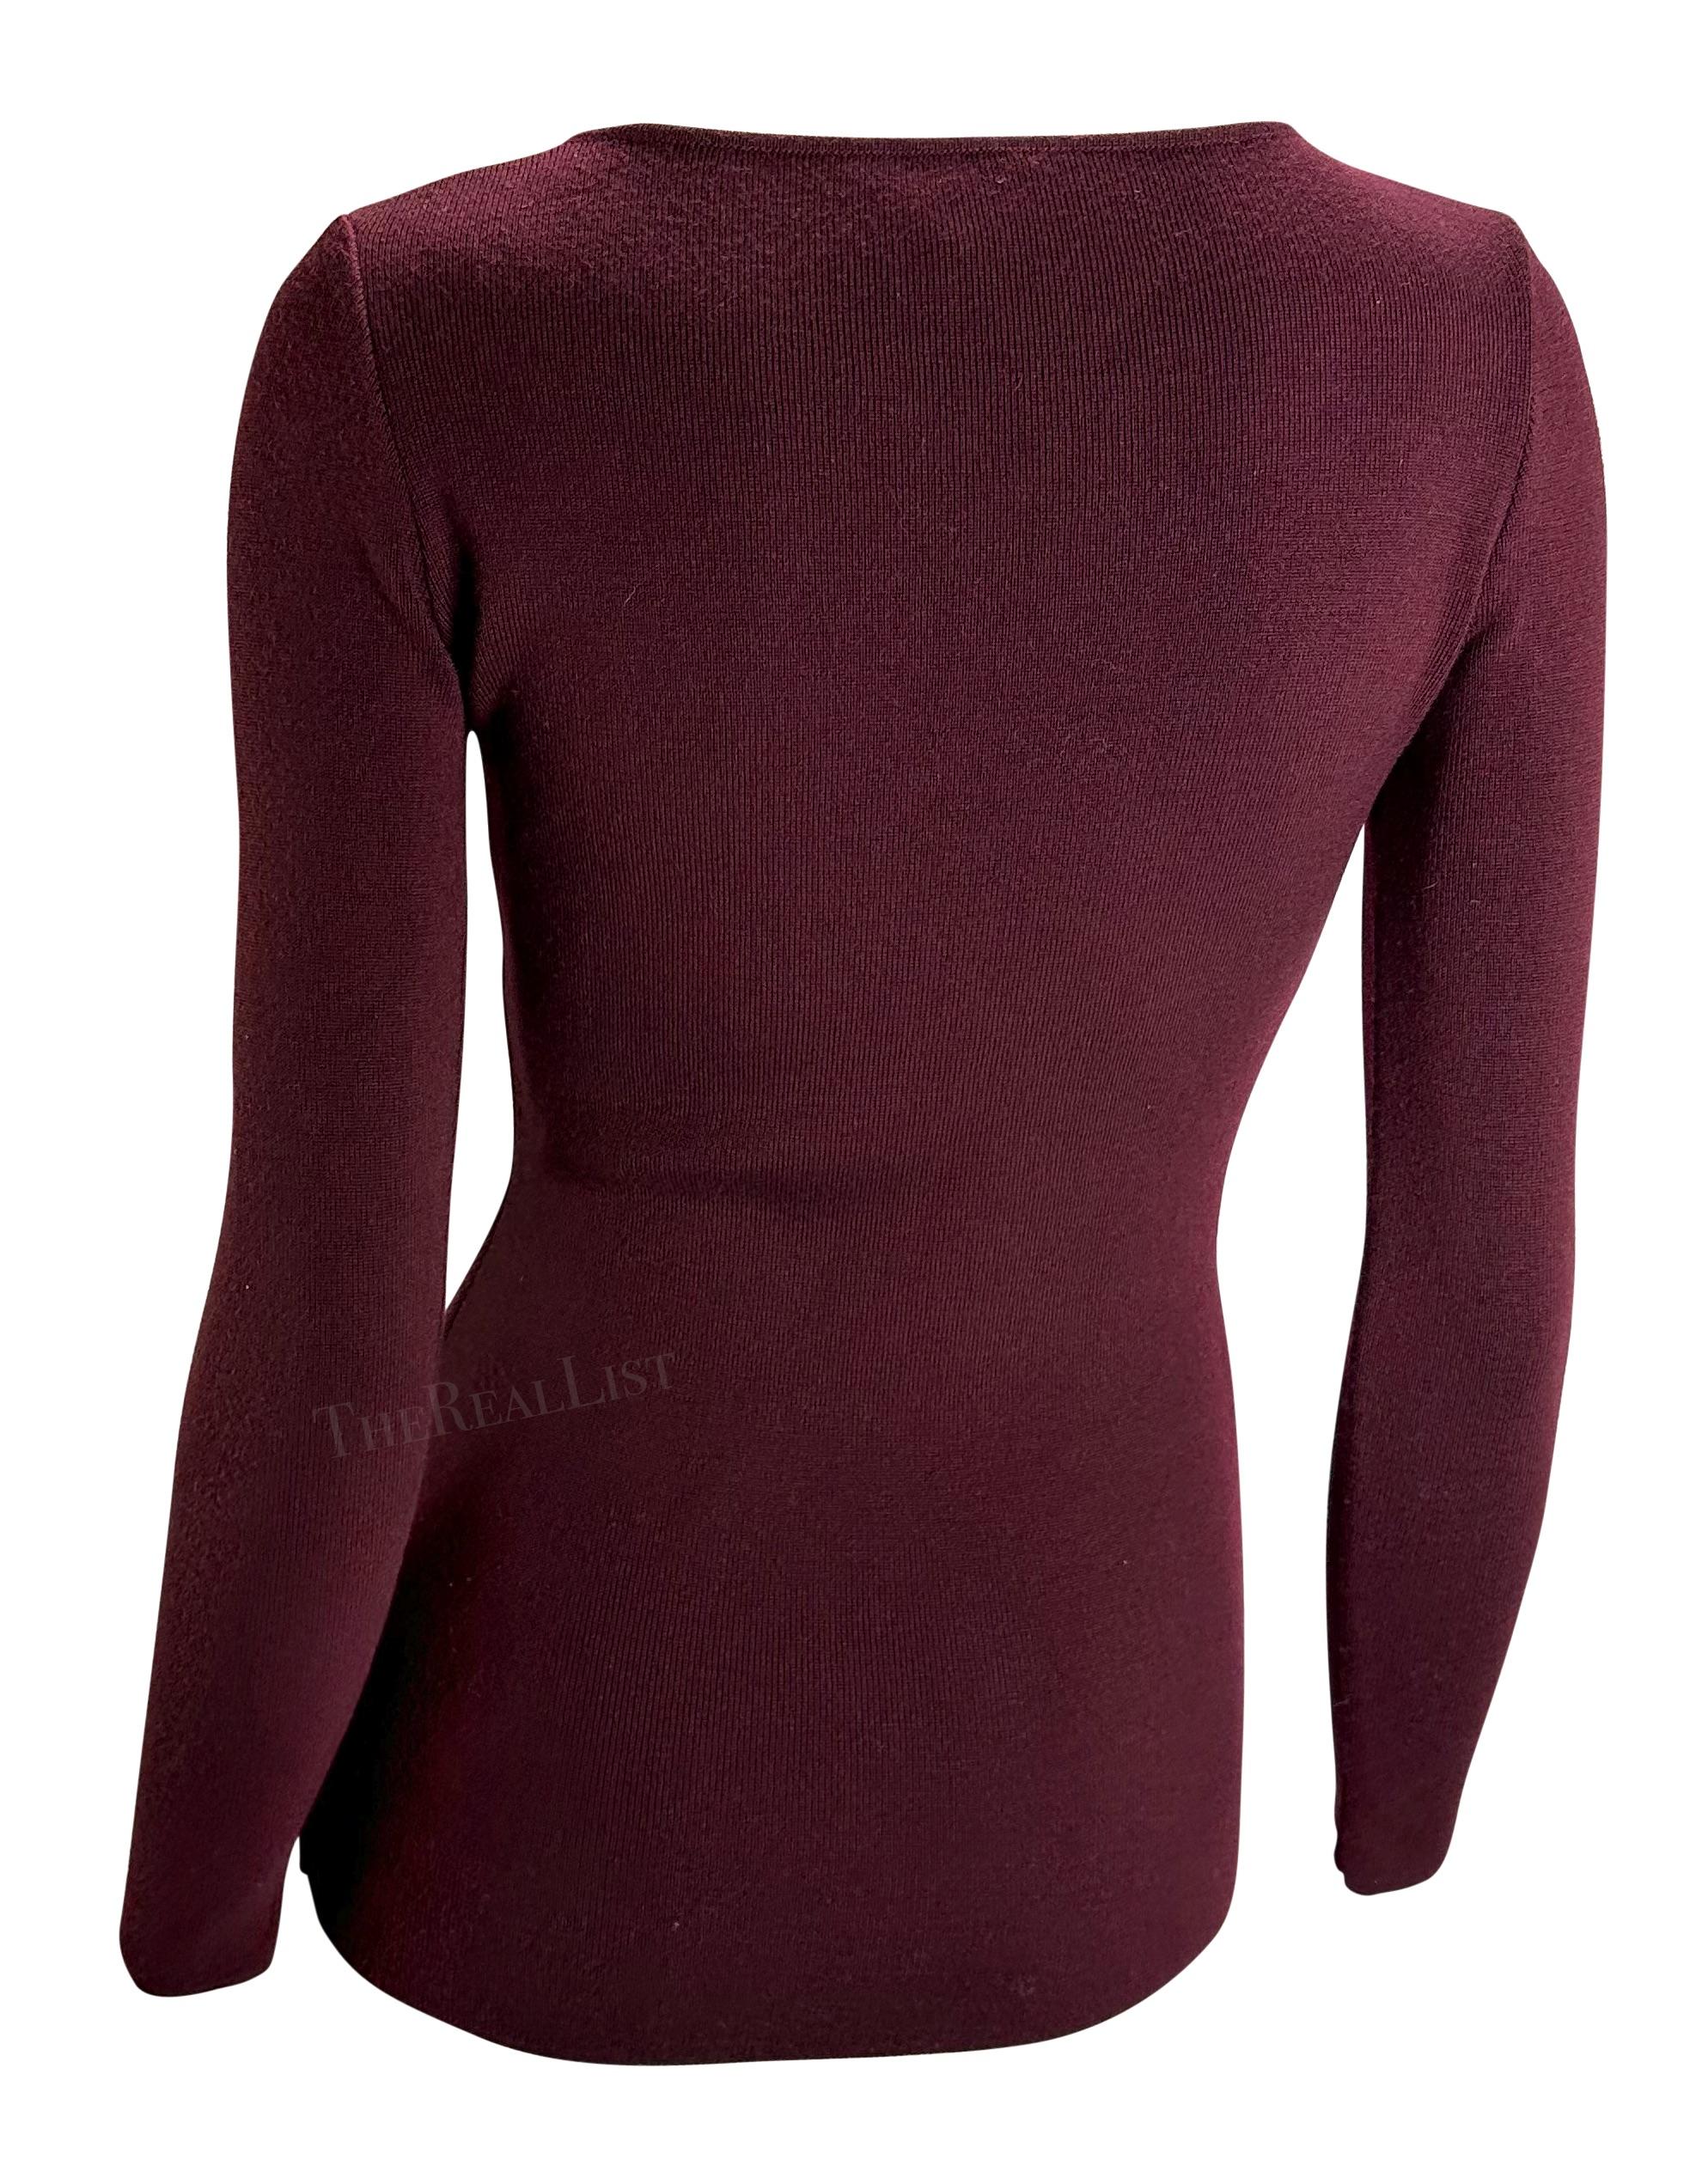 F/W 1996 Gucci by Tom Ford Burgundy Stretch Knit Wool Sweater Top Unisexe en vente